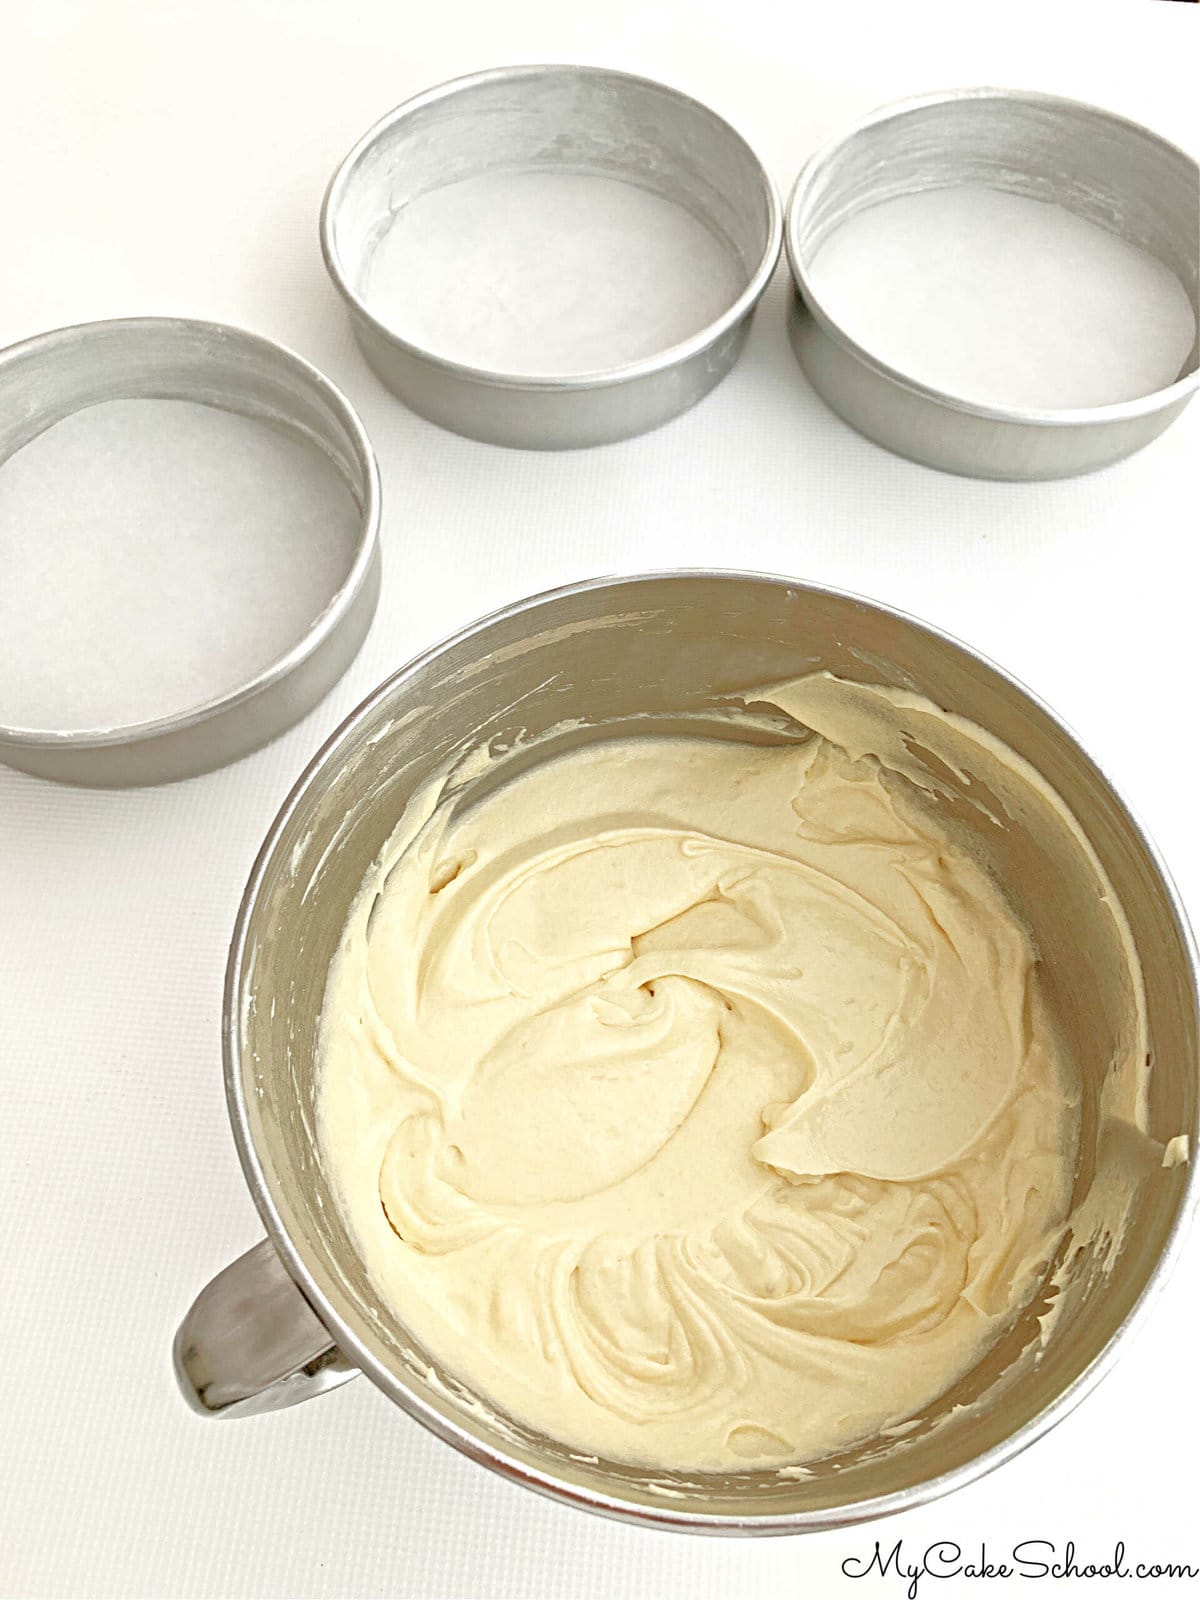 Bowl of Buttermilk Pound Cake batter along with three prepared 8 inch round cake pans